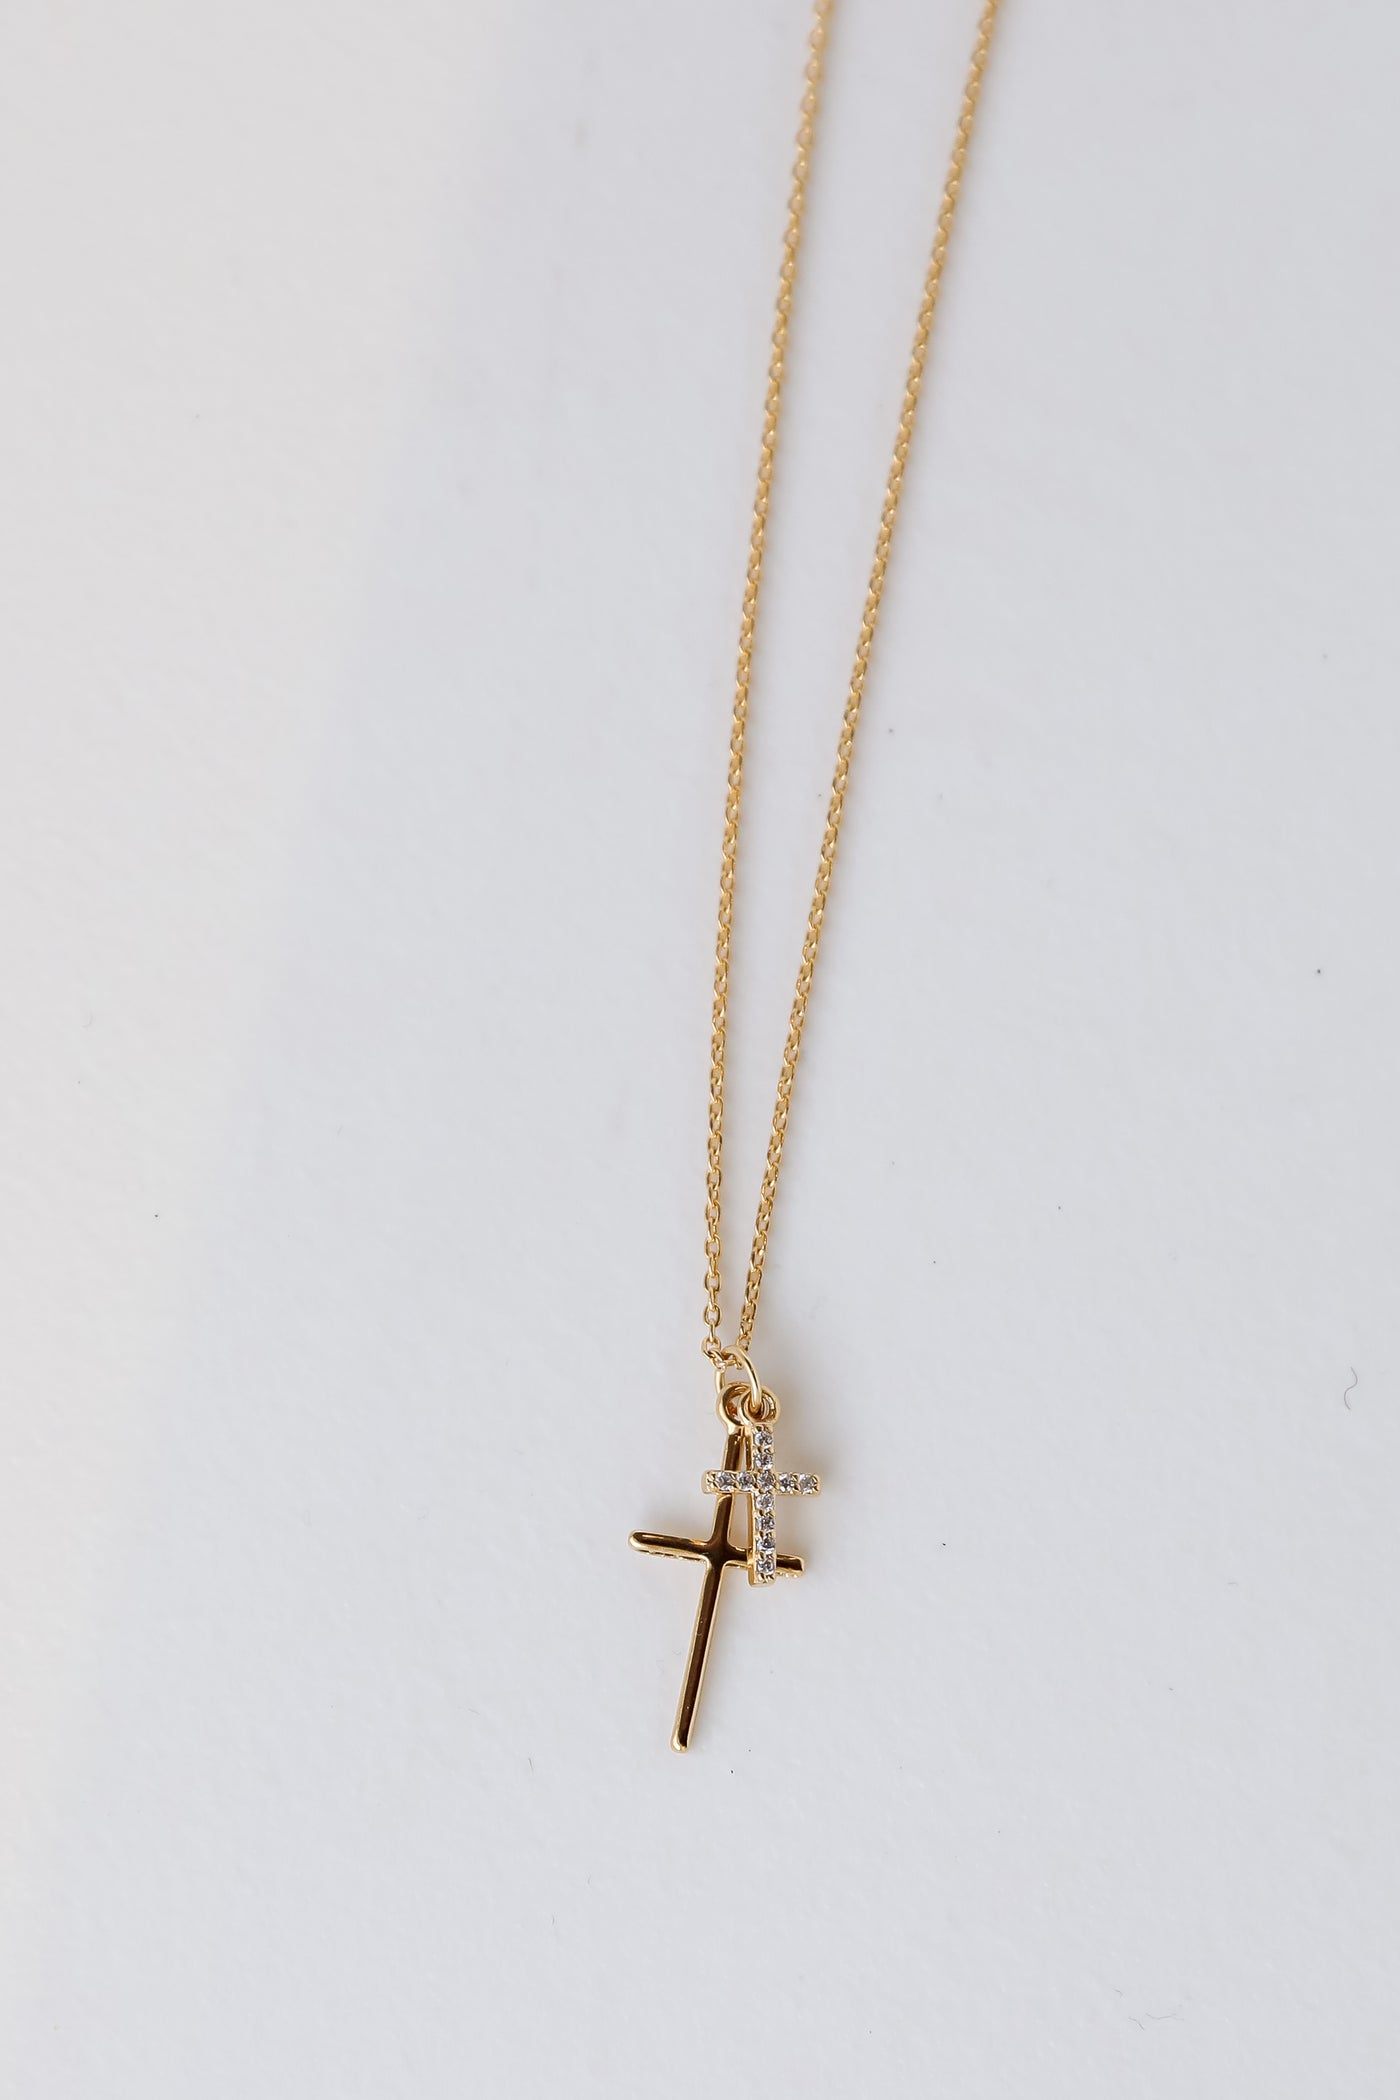 Gold Cross Charm Necklace flat lay